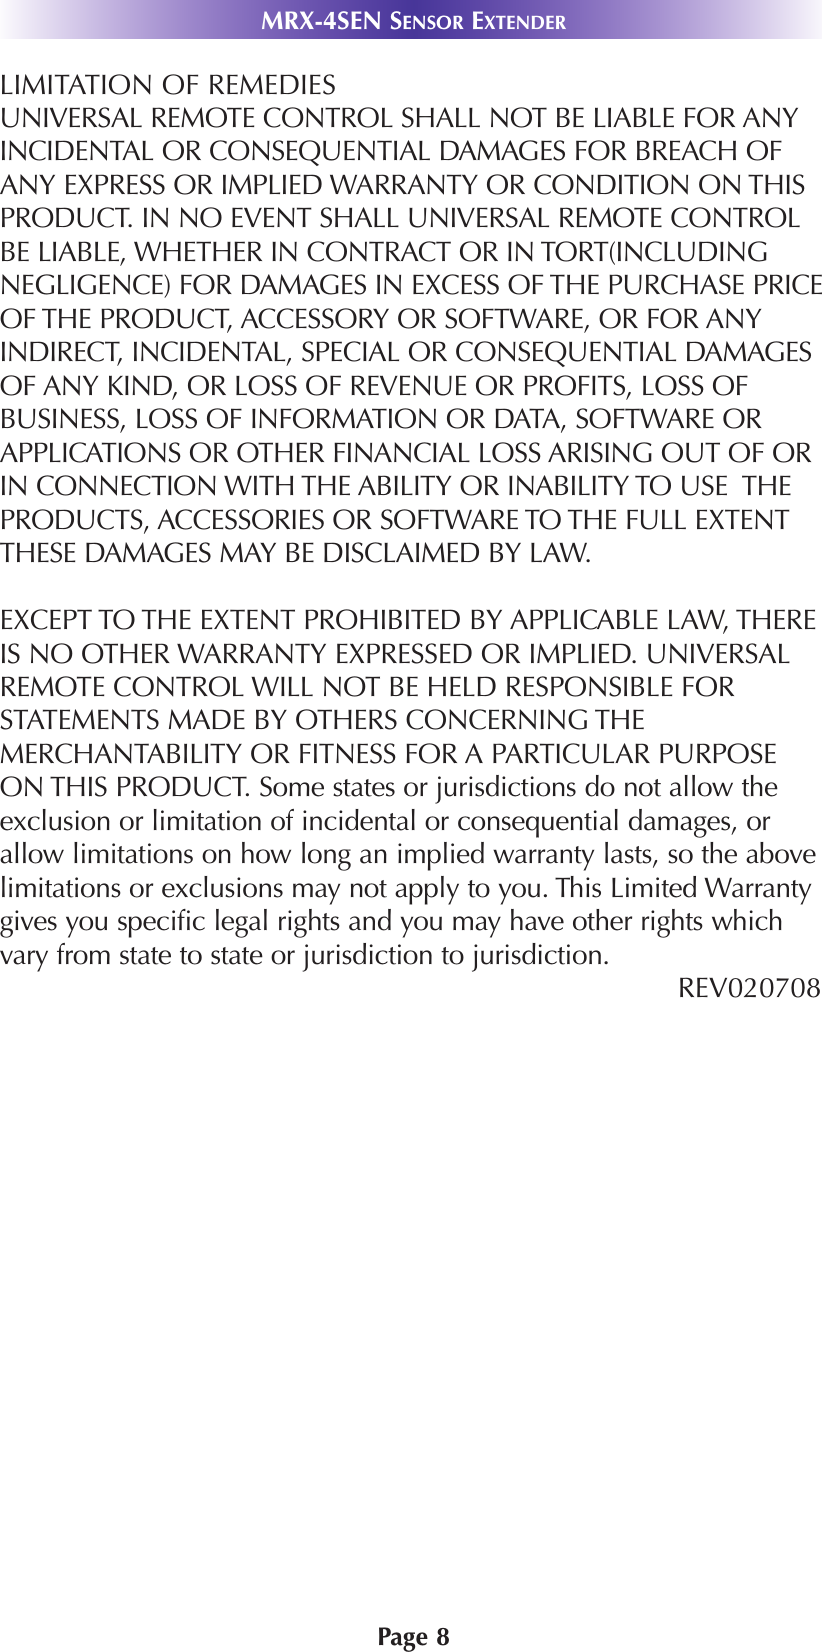 Page 8MRX-4SEN SENSOR EXTENDERLIMITATION OF REMEDIESUNIVERSAL REMOTE CONTROL SHALL NOT BE LIABLE FOR ANYINCIDENTAL OR CONSEQUENTIAL DAMAGES FOR BREACH OFANY EXPRESS OR IMPLIED WARRANTY OR CONDITION ON THISPRODUCT. IN NO EVENT SHALL UNIVERSAL REMOTE CONTROLBE LIABLE, WHETHER IN CONTRACT OR IN TORT(INCLUDINGNEGLIGENCE) FOR DAMAGES IN EXCESS OF THE PURCHASE PRICEOF THE PRODUCT, ACCESSORY OR SOFTWARE, OR FOR ANYINDIRECT, INCIDENTAL, SPECIAL OR CONSEQUENTIAL DAMAGESOF ANY KIND, OR LOSS OF REVENUE OR PROFITS, LOSS OFBUSINESS, LOSS OF INFORMATION OR DATA, SOFTWARE ORAPPLICATIONS OR OTHER FINANCIAL LOSS ARISING OUT OF ORIN CONNECTION WITH THE ABILITY OR INABILITY TO USE  THEPRODUCTS, ACCESSORIES OR SOFTWARE TO THE FULL EXTENTTHESE DAMAGES MAY BE DISCLAIMED BY LAW. EXCEPT TO THE EXTENT PROHIBITED BY APPLICABLE LAW, THEREIS NO OTHER WARRANTY EXPRESSED OR IMPLIED. UNIVERSALREMOTE CONTROL WILL NOT BE HELD RESPONSIBLE FORSTATEMENTS MADE BY OTHERS CONCERNING THEMERCHANTABILITY OR FITNESS FOR A PARTICULAR PURPOSEON THIS PRODUCT. Some states or jurisdictions do not allow theexclusion or limitation of incidental or consequential damages, orallow limitations on how long an implied warranty lasts, so the abovelimitations or exclusions may not apply to you. This Limited Warrantygives you specific legal rights and you may have other rights whichvary from state to state or jurisdiction to jurisdiction.REV020708 